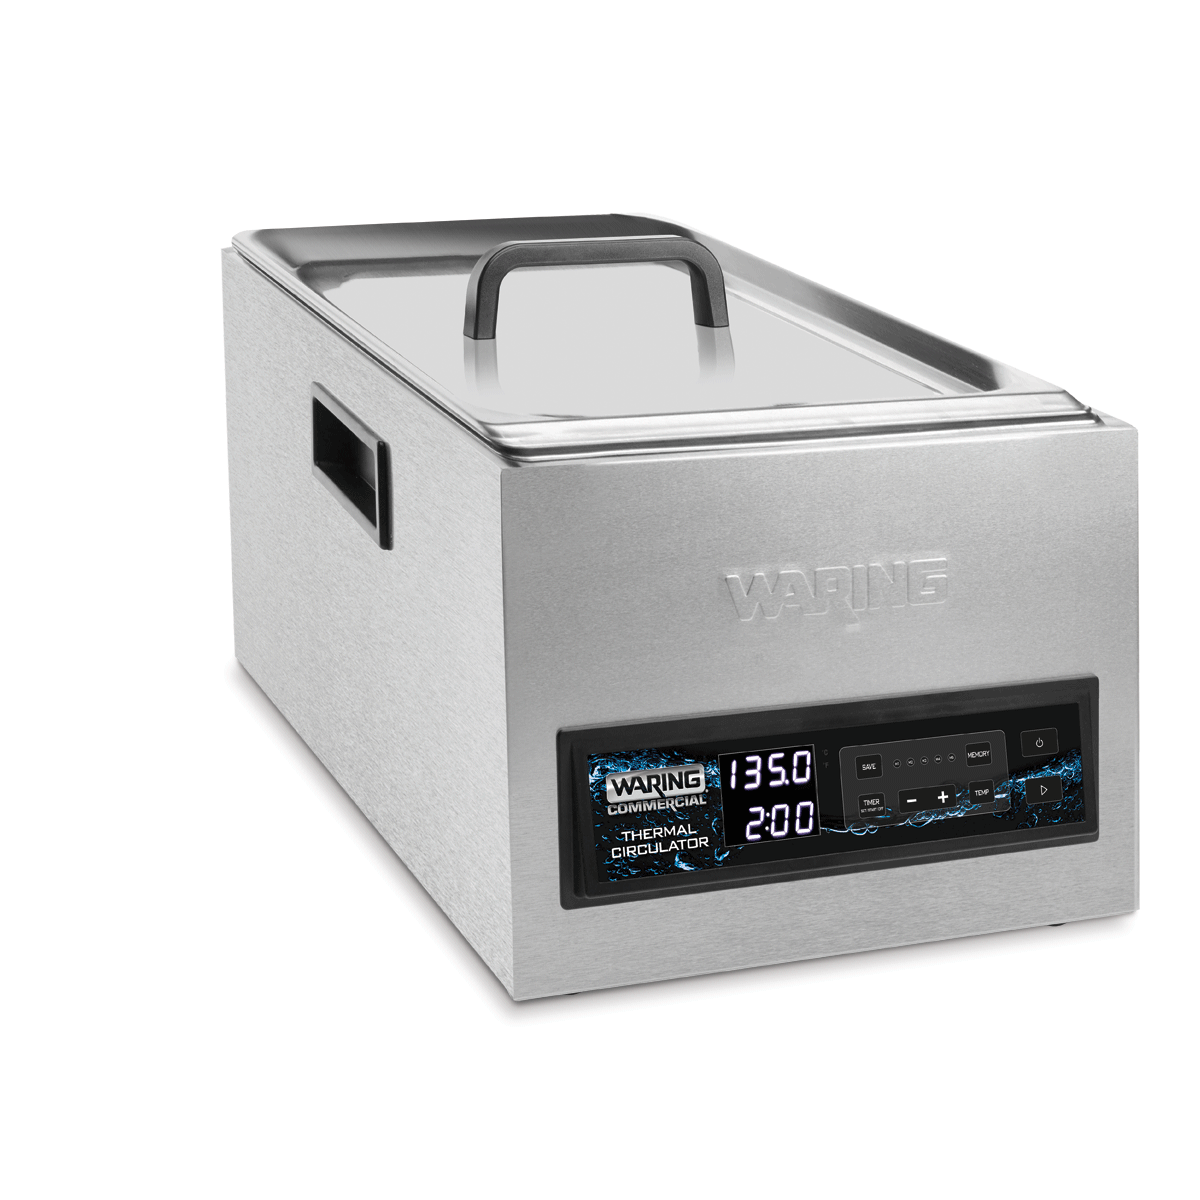 https://www.waringlab.com/assets/images/database/products/wsv25-wsv25e-wsv25k-waring-lab-thermal-circulator-main.png